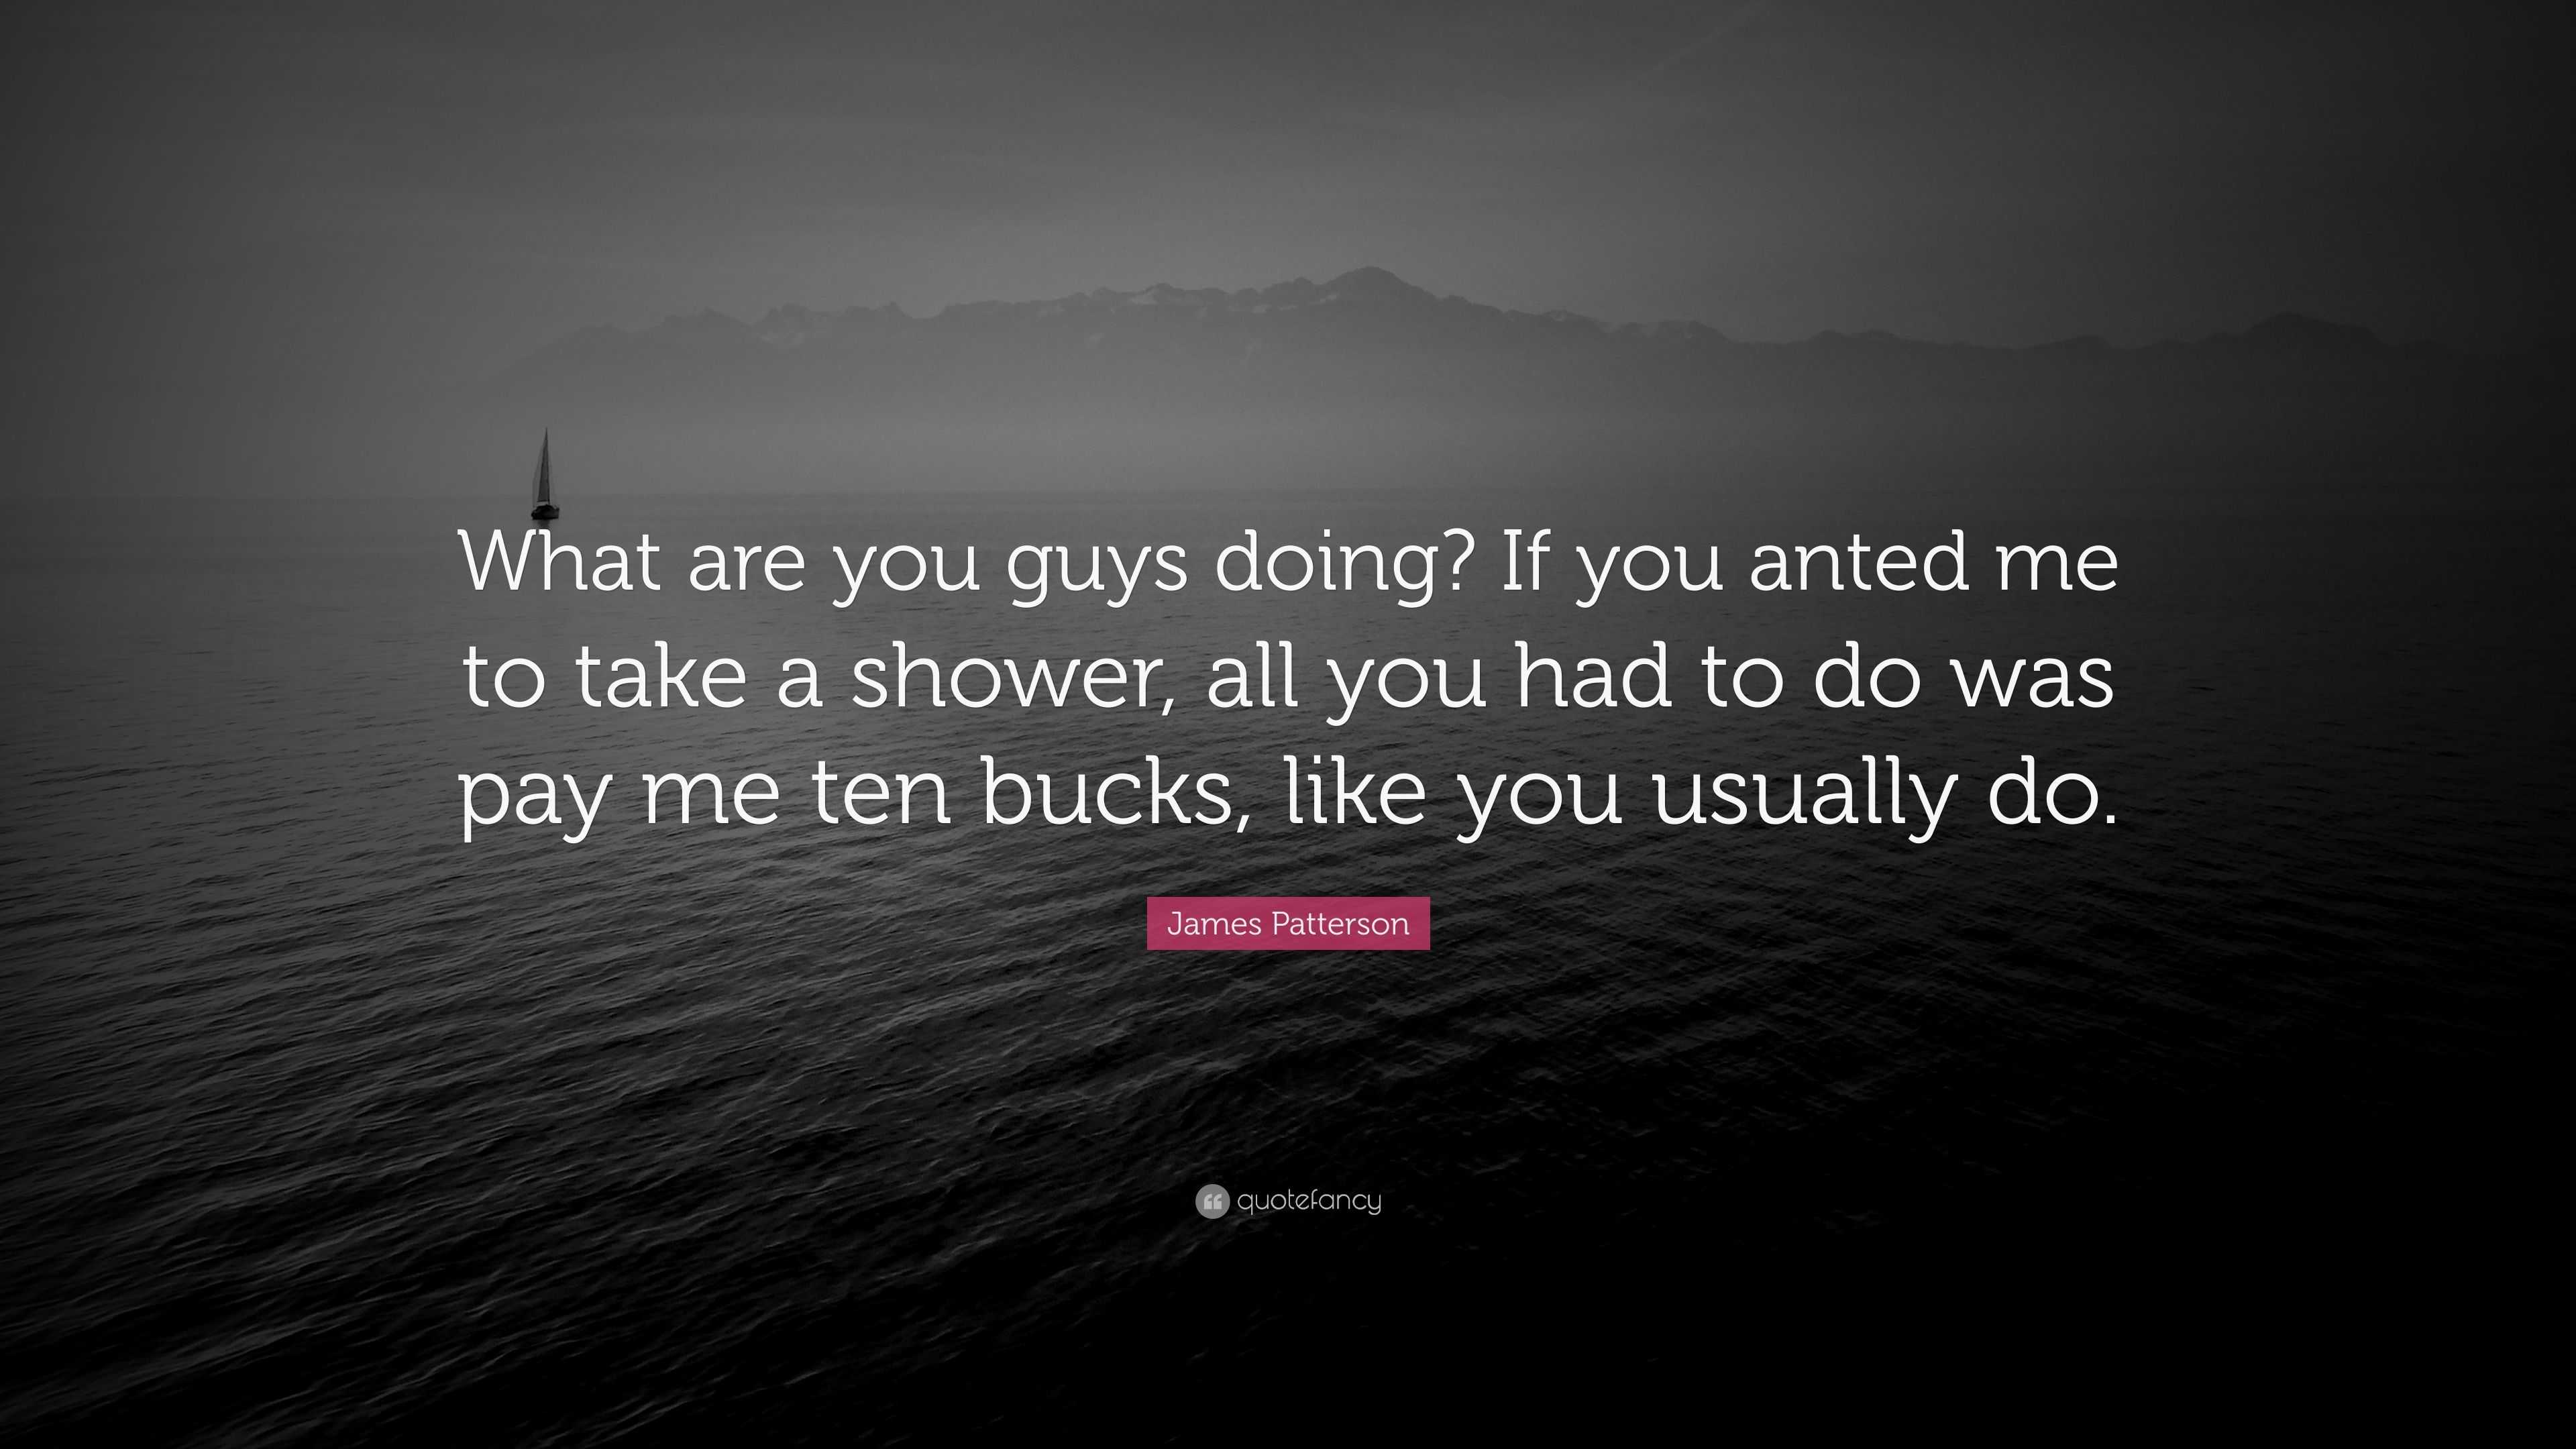 James Patterson Quote “what Are You Guys Doing If You Anted Me To Take A Shower All You Had 8251